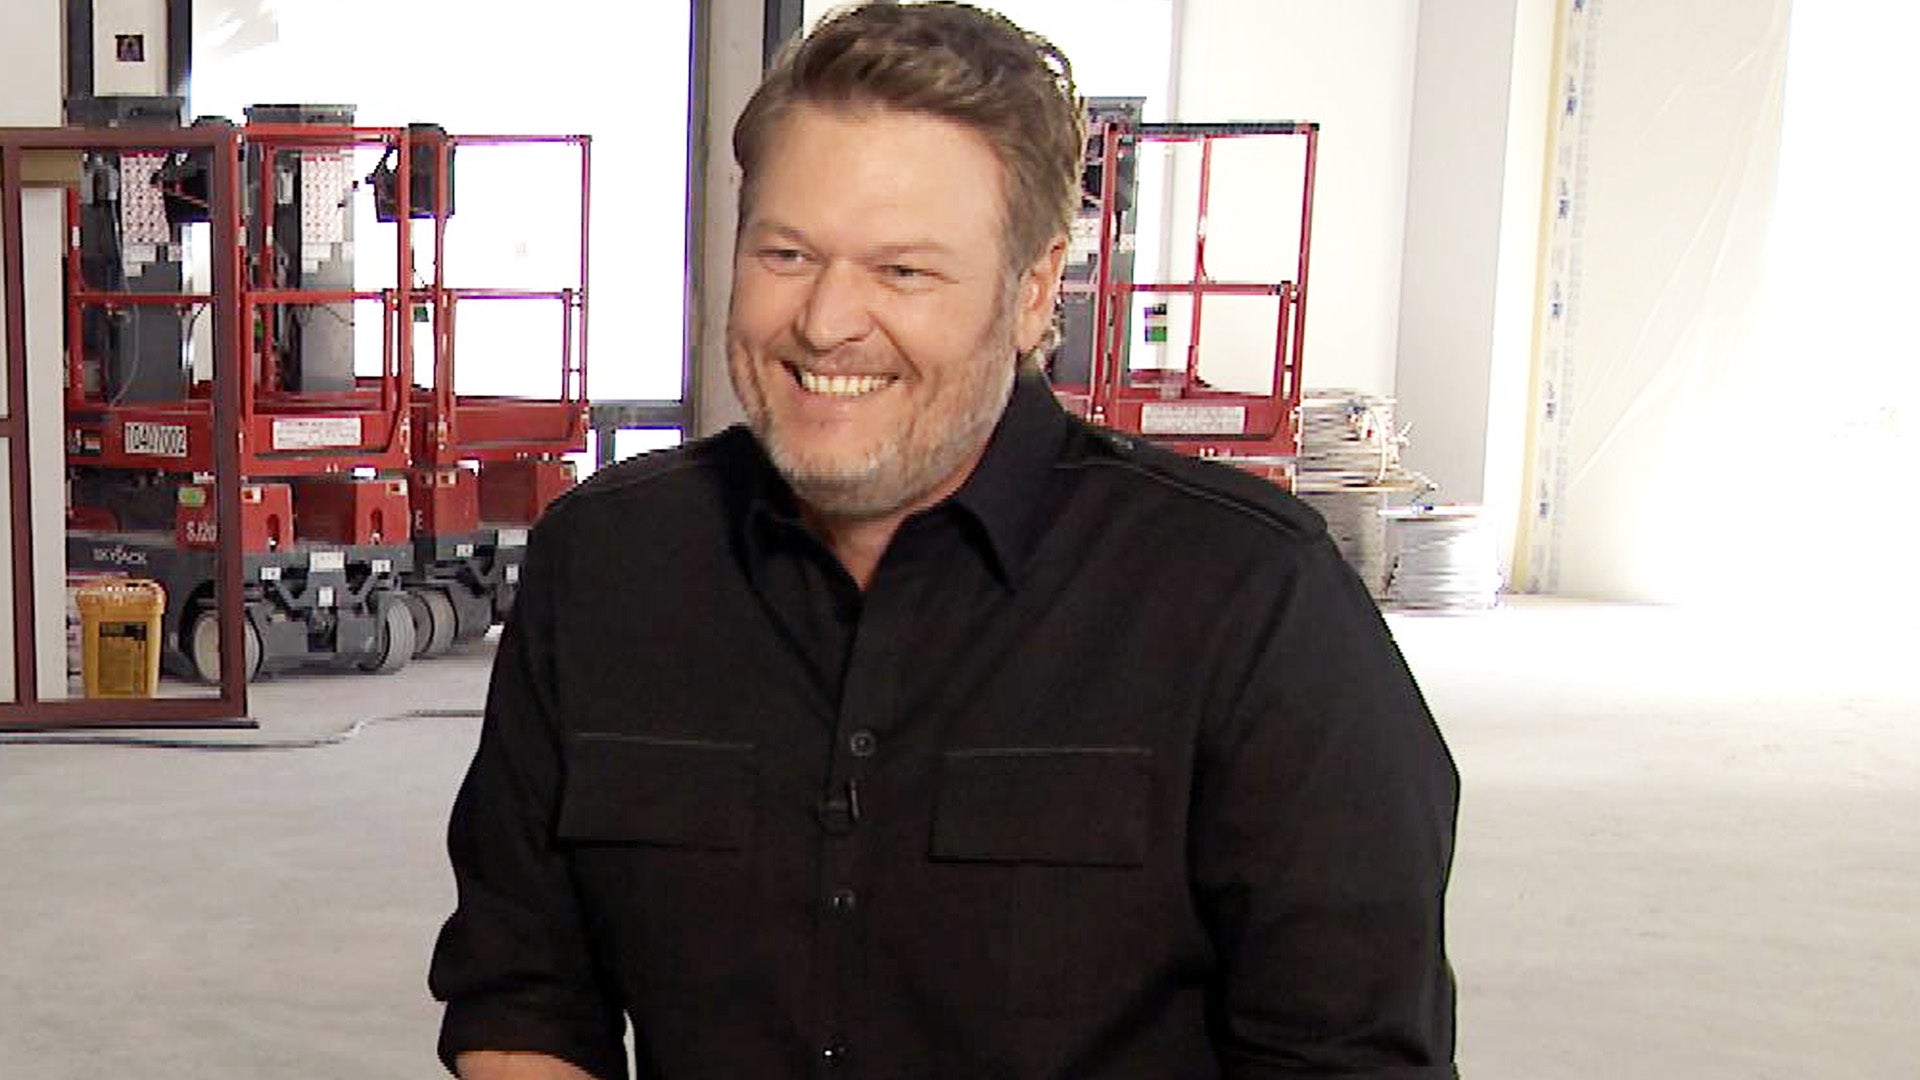 Blake Shelton Shows Off Future Ole Red Bar in Las Vegas and Dishes on New Music (Exclusive)